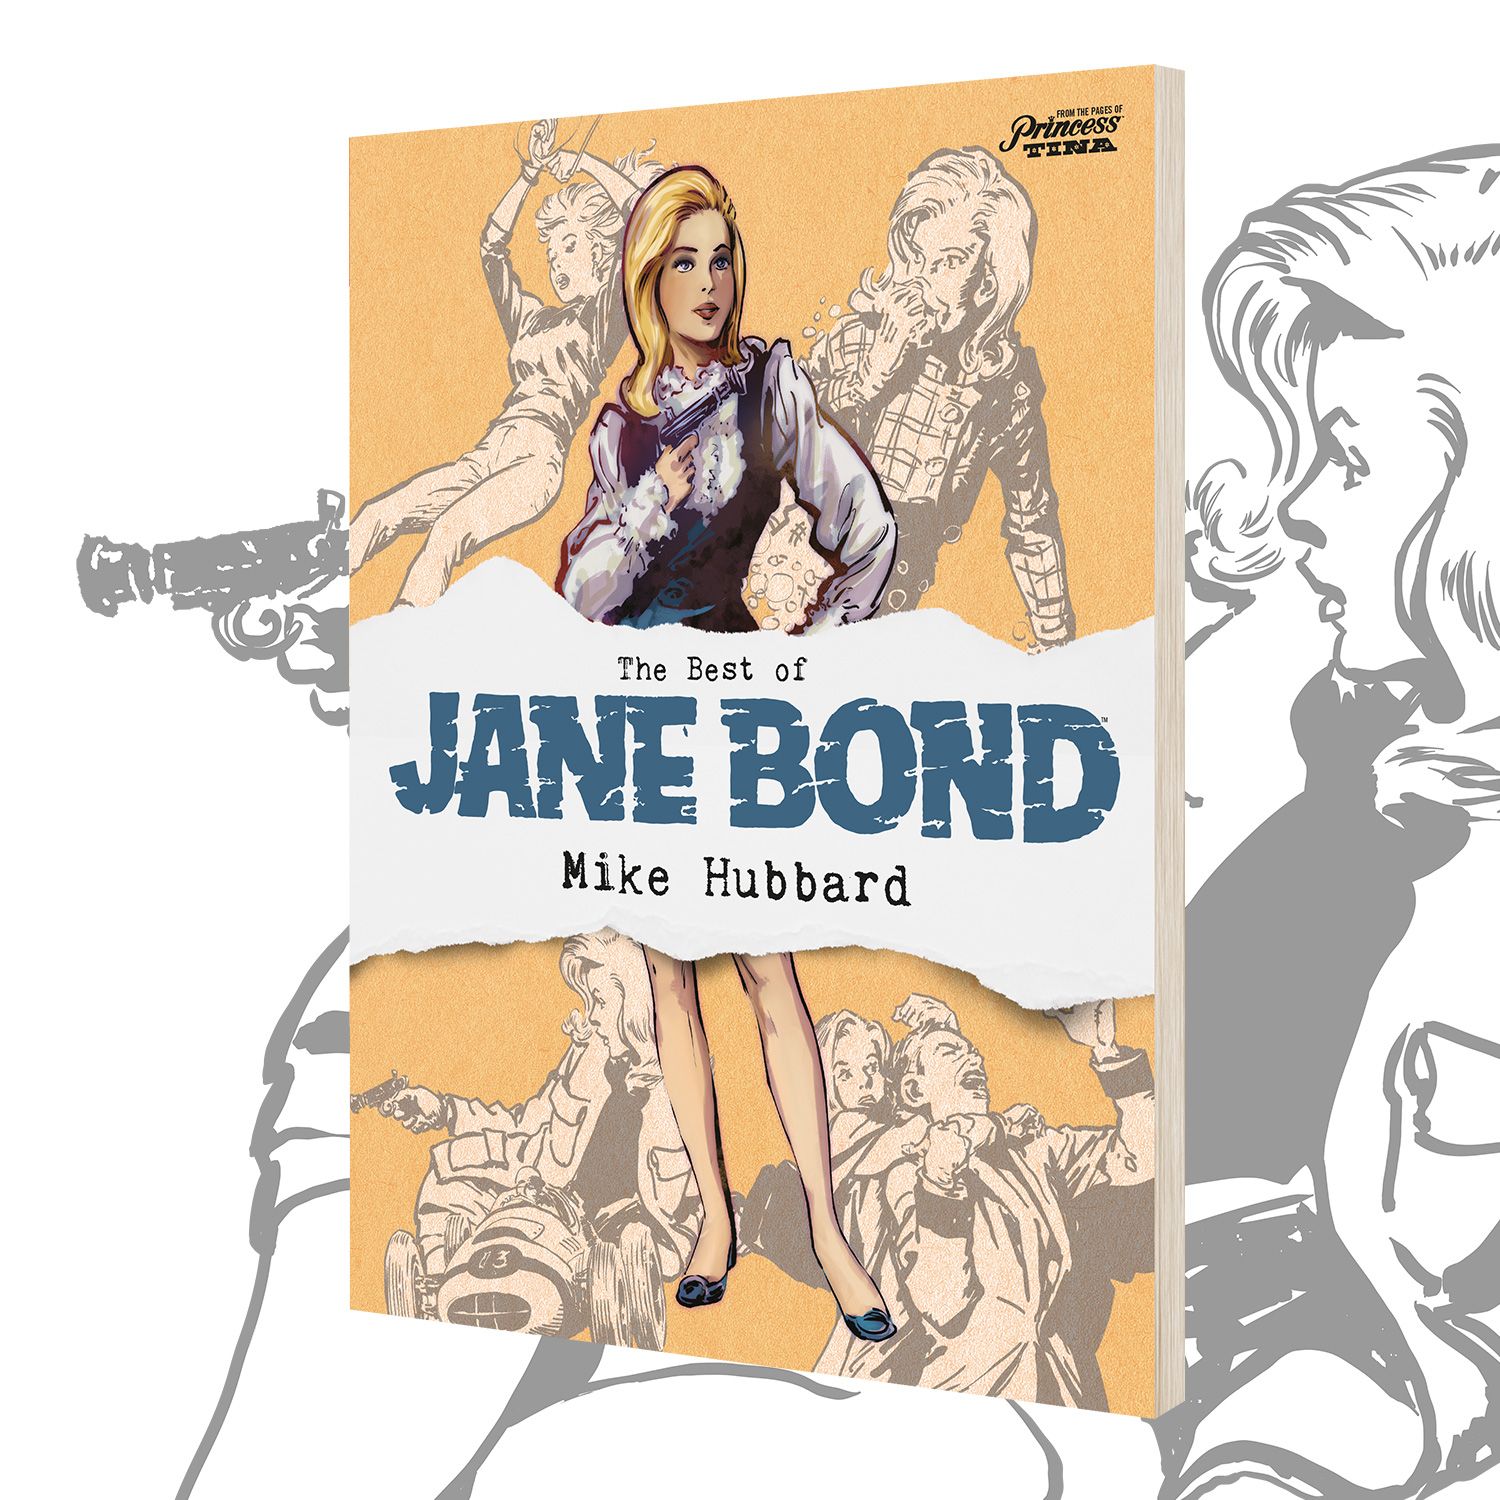 The name’s Bond … Jane Bond! Pre-order the ‘best of’ collection now!